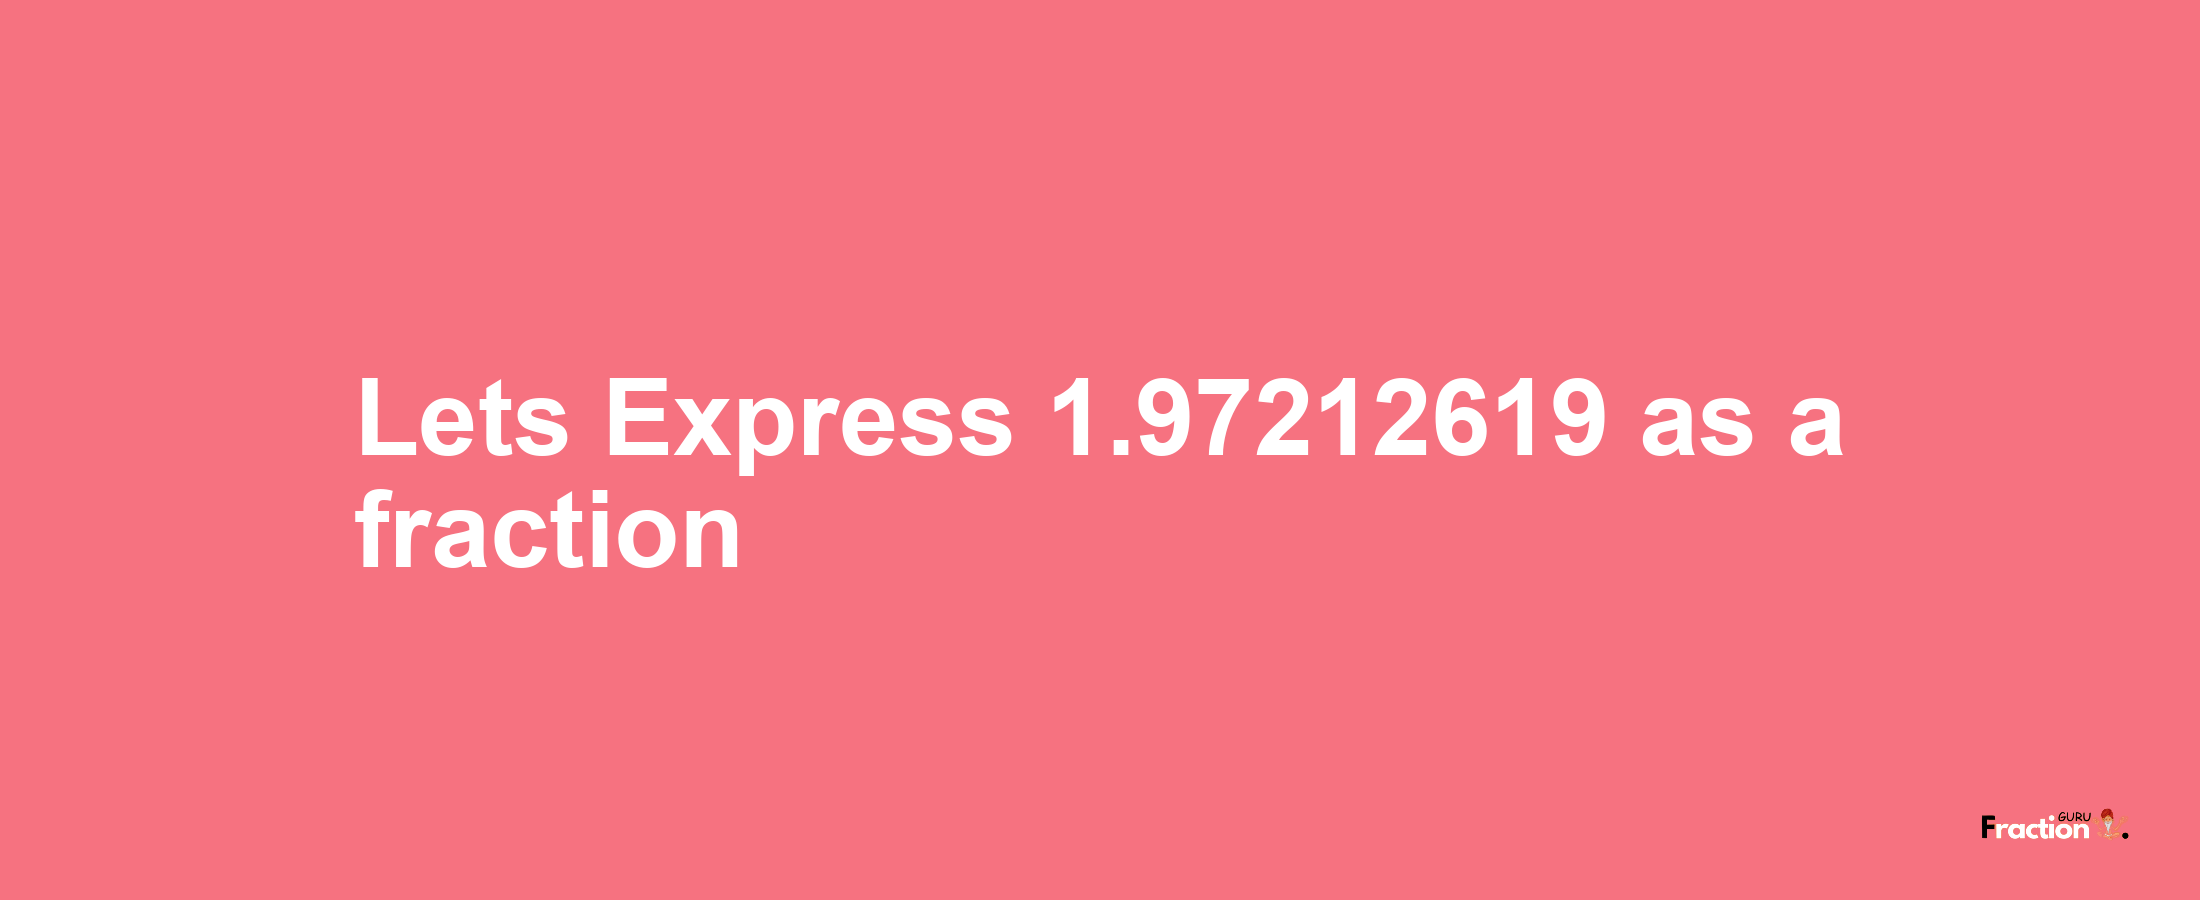 Lets Express 1.97212619 as afraction